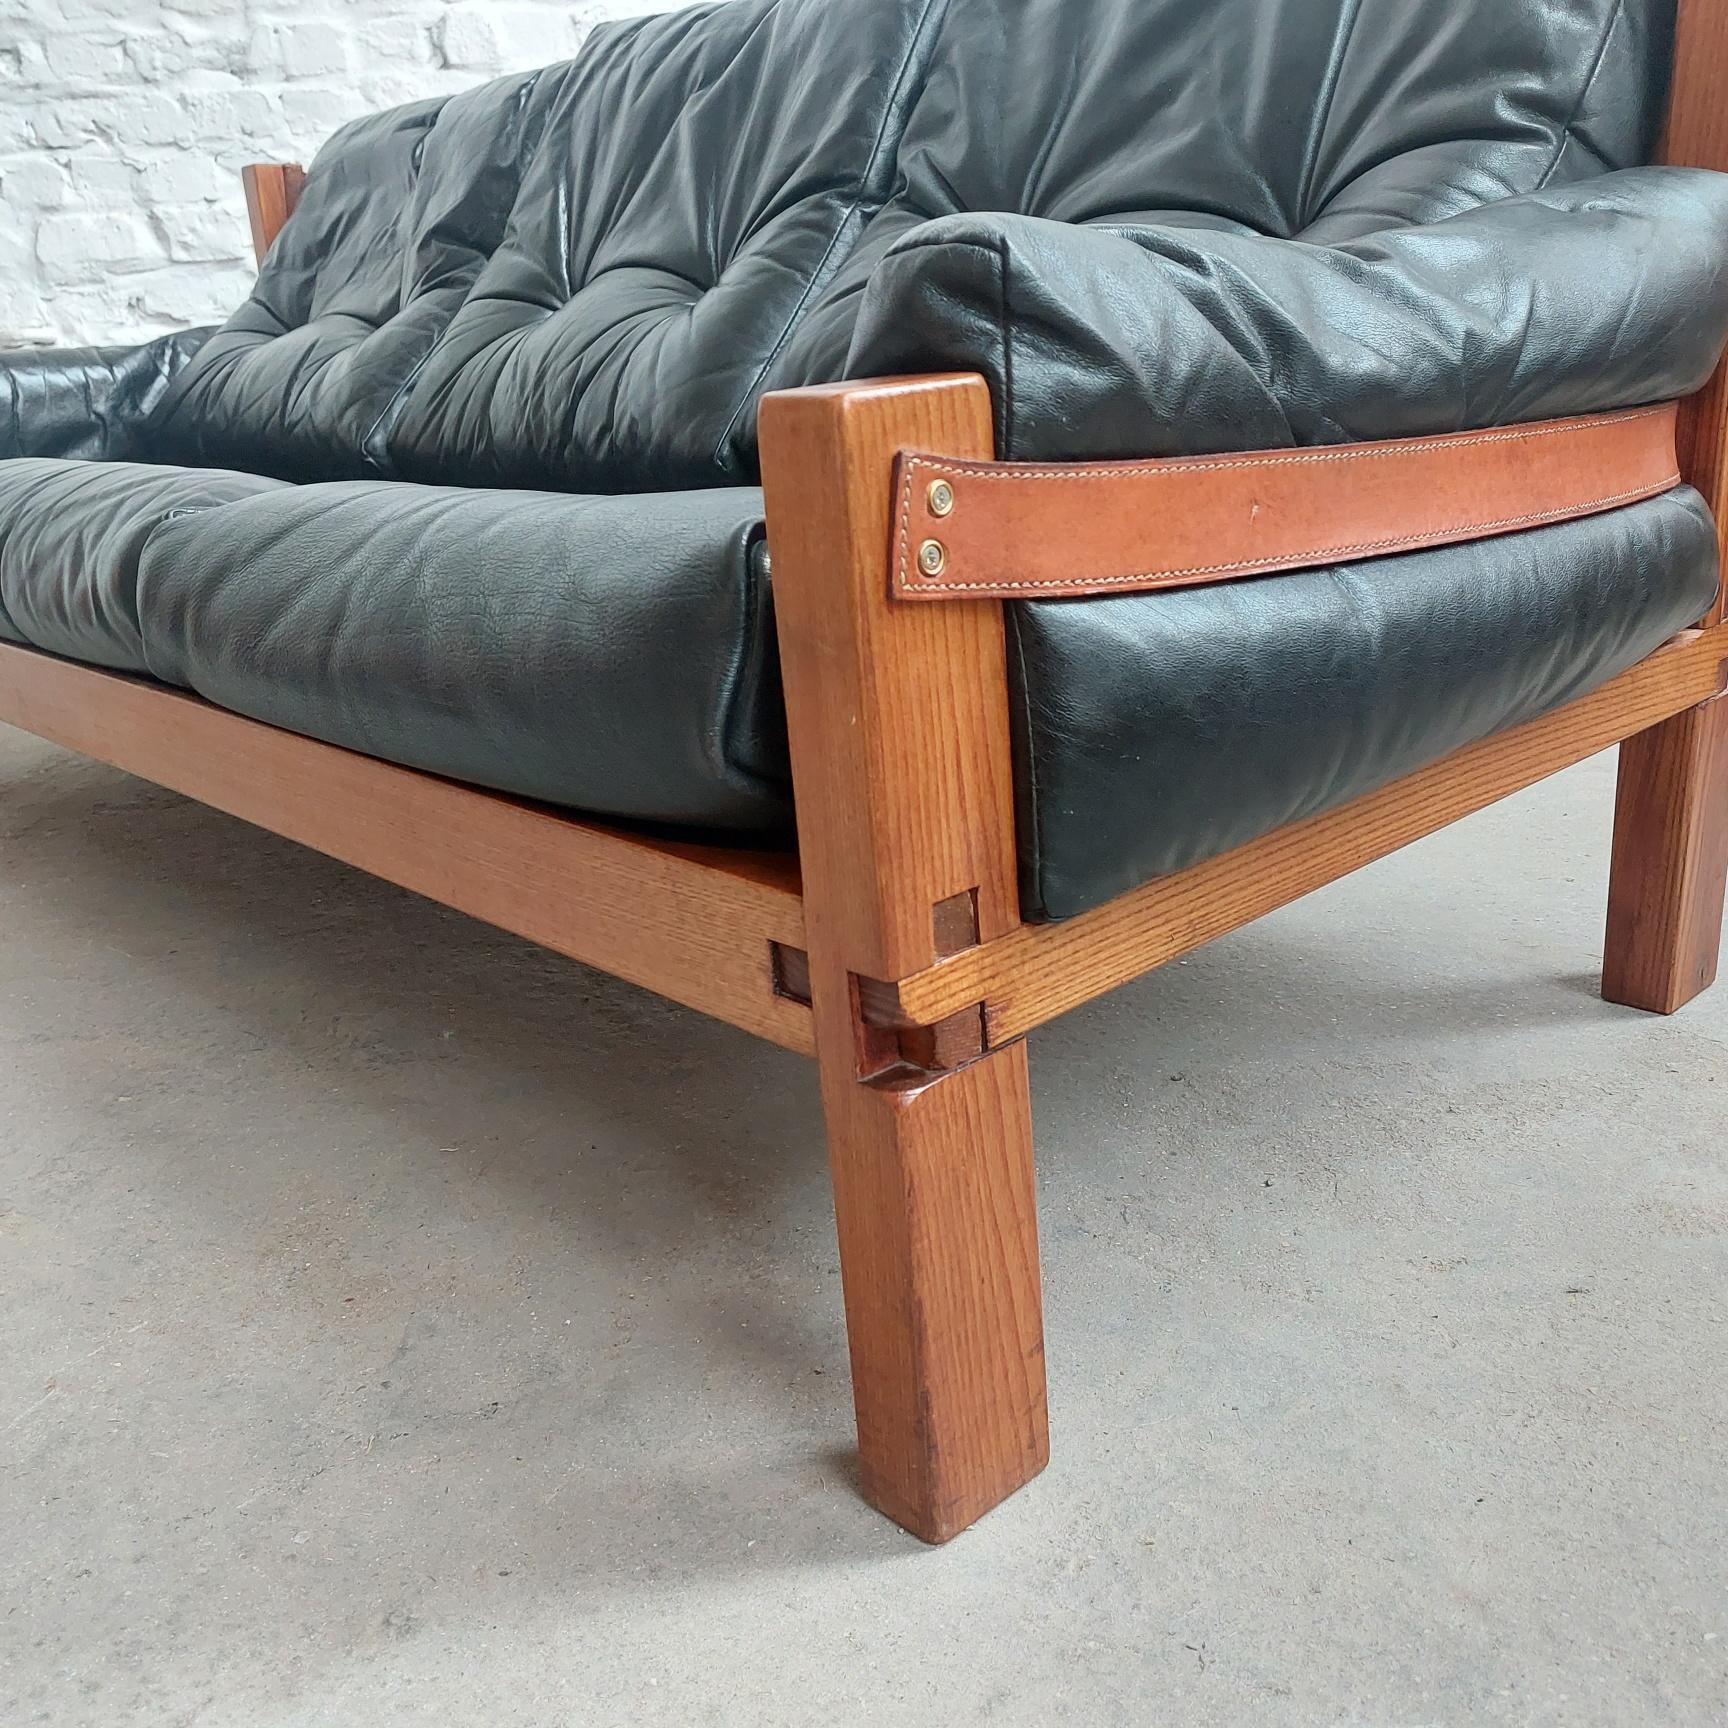 Fantastic Pierre chapo bench 3-seater sofa in a full original condition.
Superb comfortable sofa with the well known chapo cube-connector details in its legs. Fantastic wood  has only one almost invisible small chip on the backside of then wood.